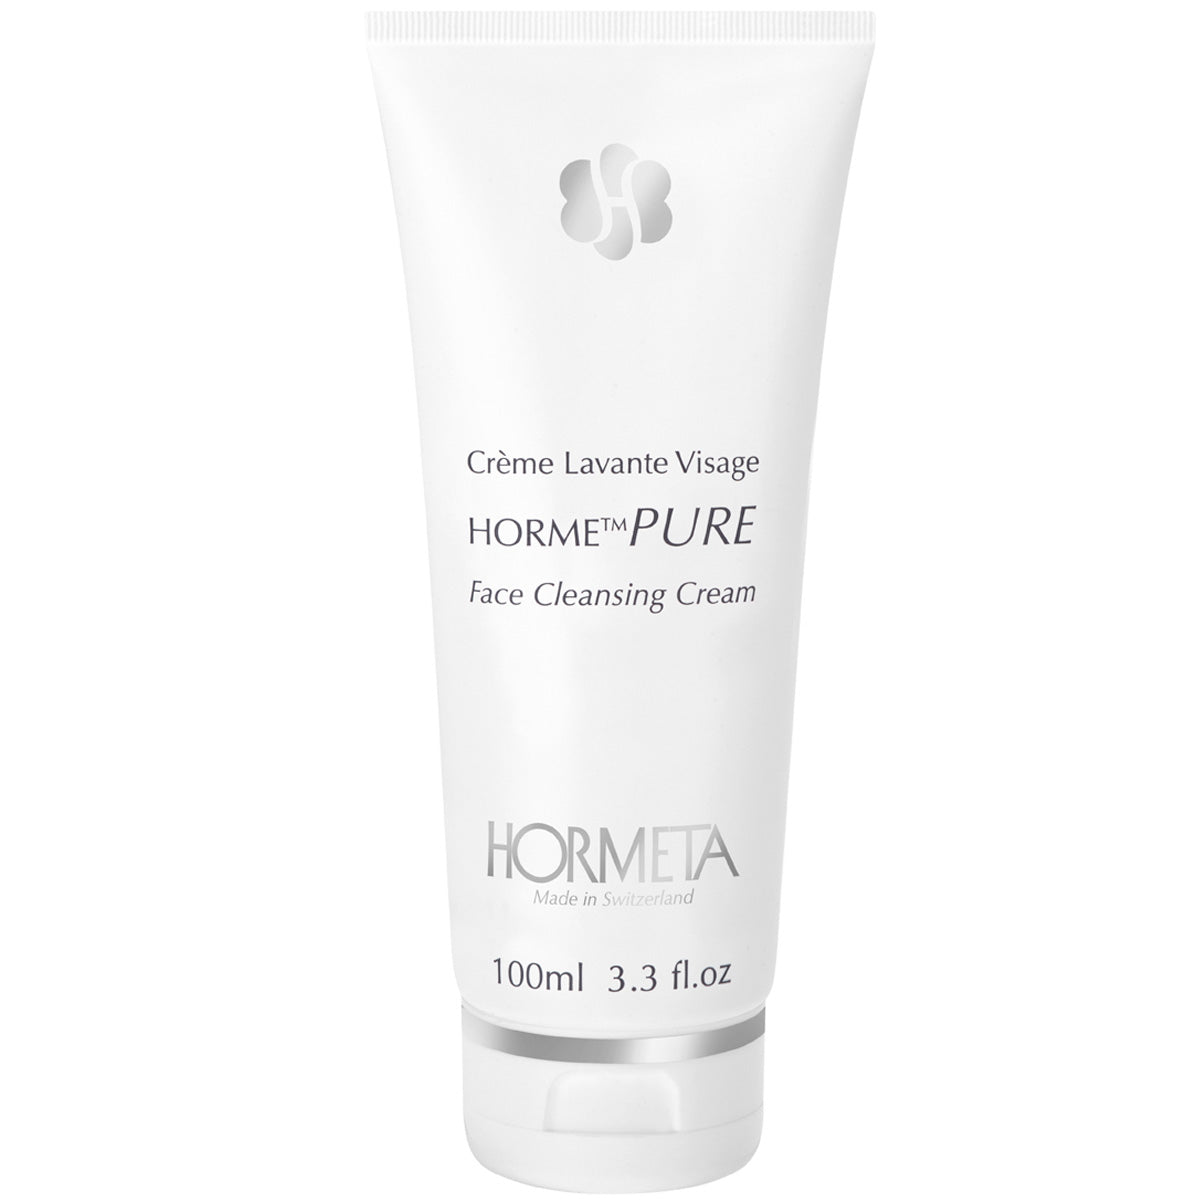 HORME PURE Face Cleansing Cream 3